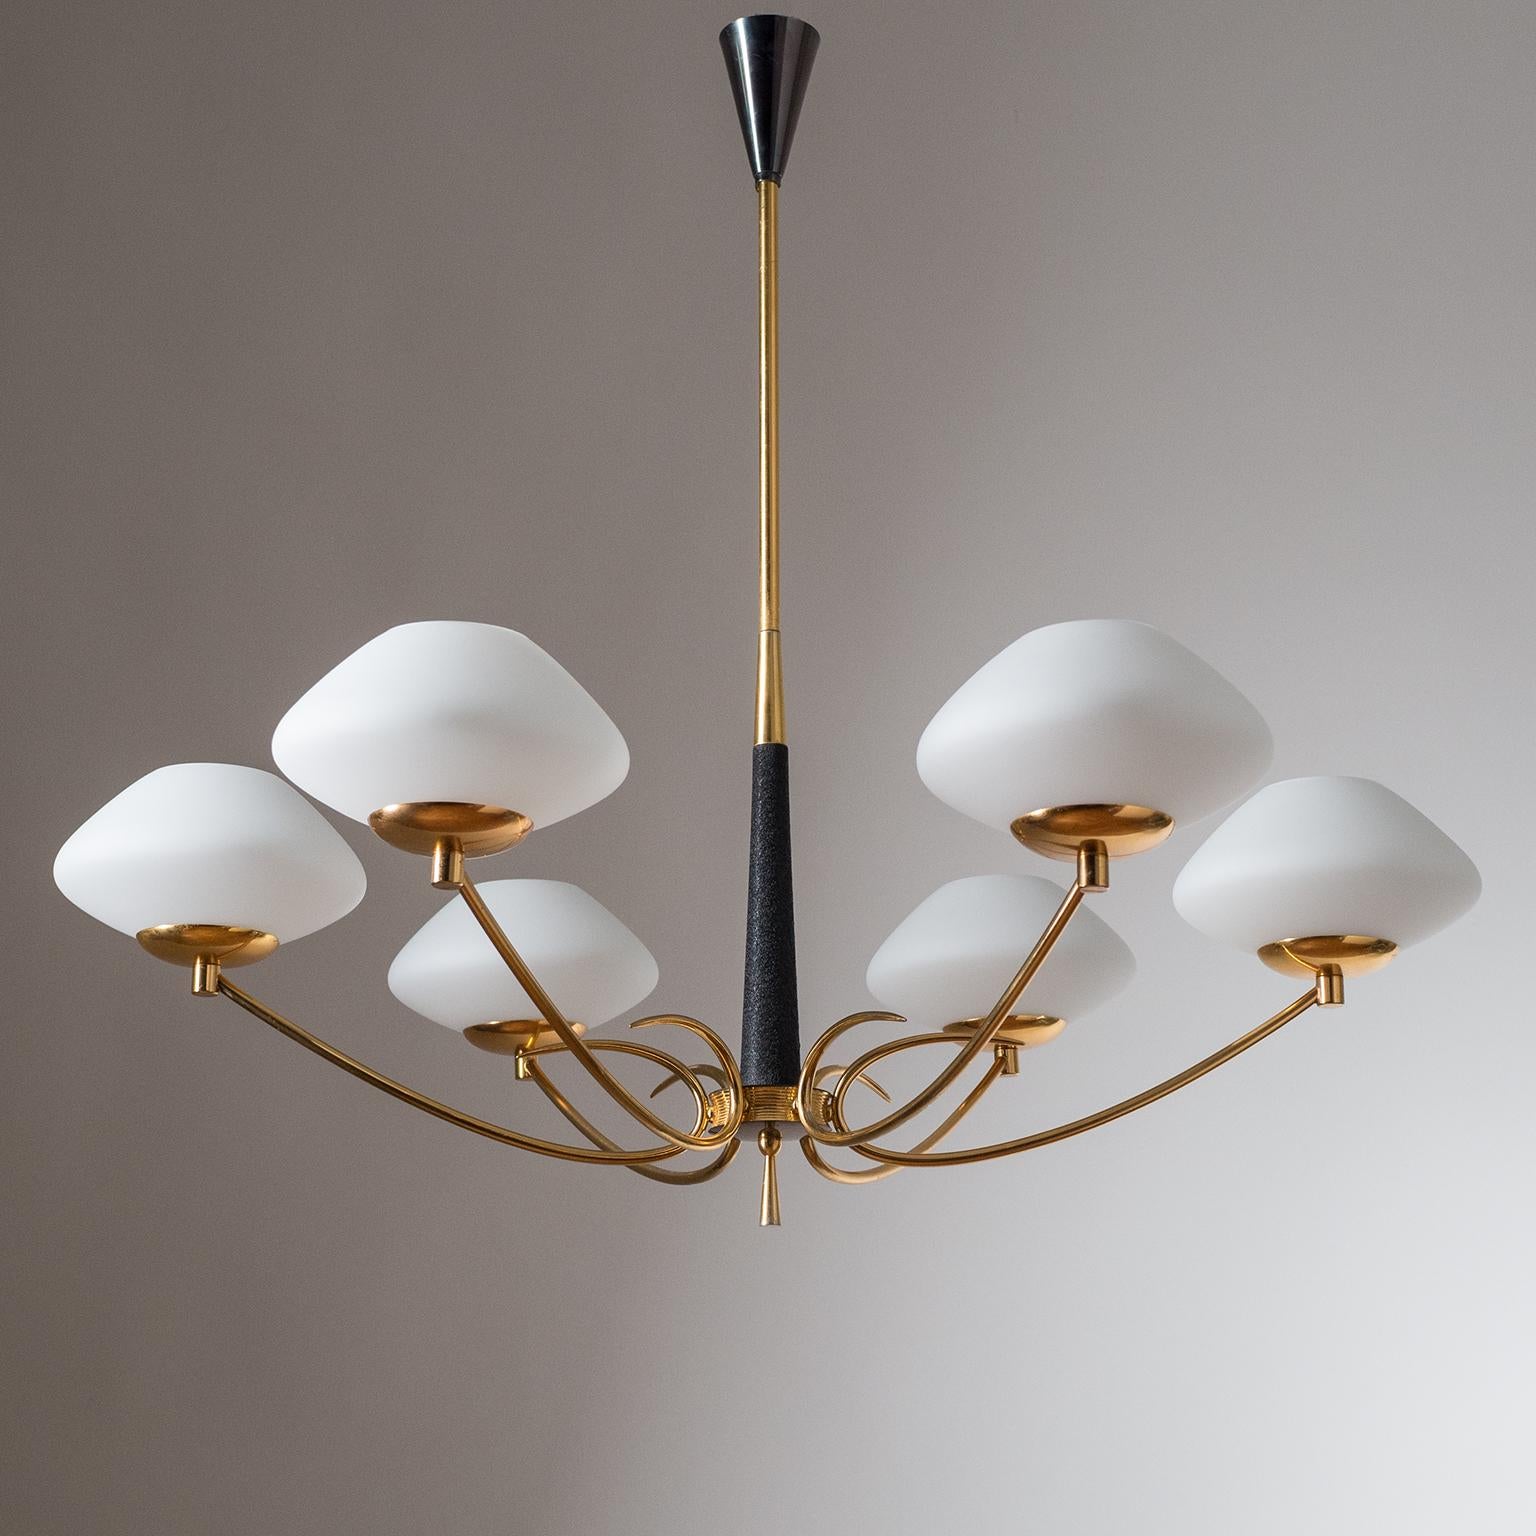 Elegant French Modern chandelier from the 1950s. Six gilt brass arms with satin glass diffusers and brass and ceramic E14 sockets with new wiring.